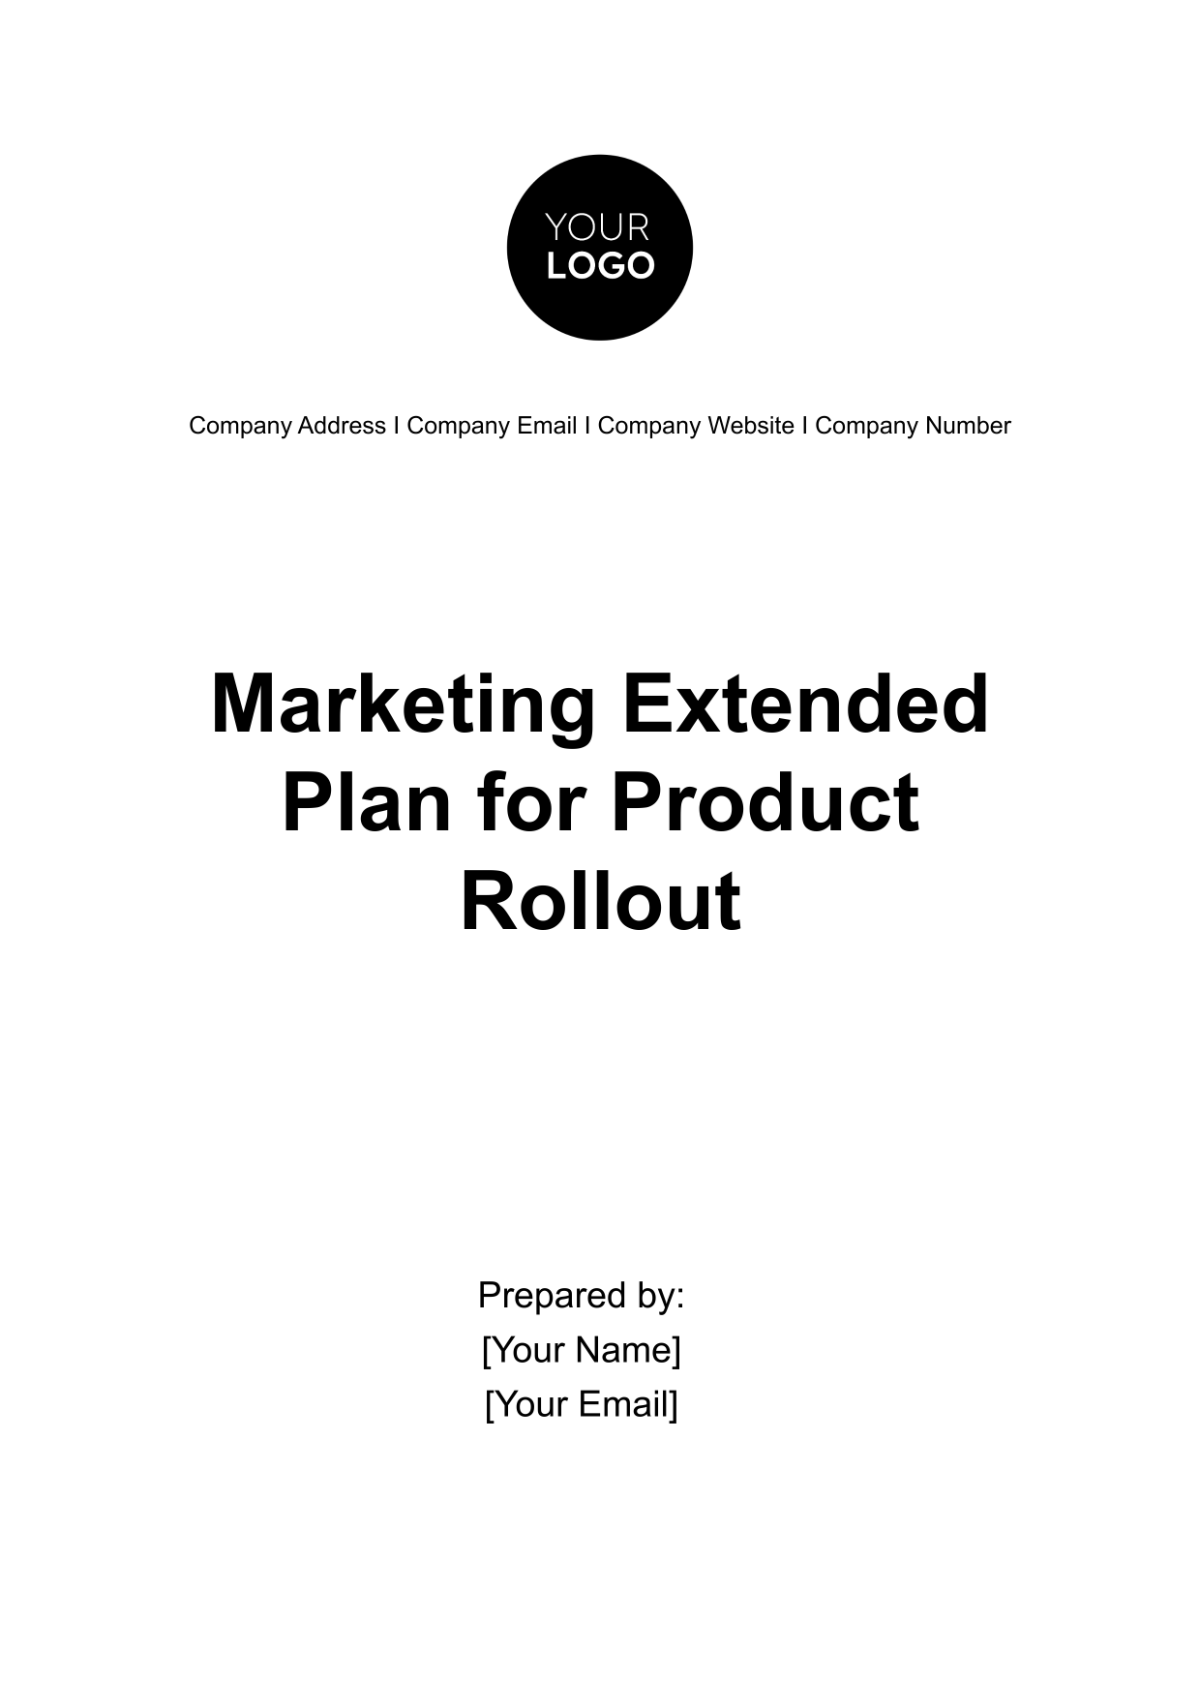 Marketing Extended Plan for Product Rollout Template